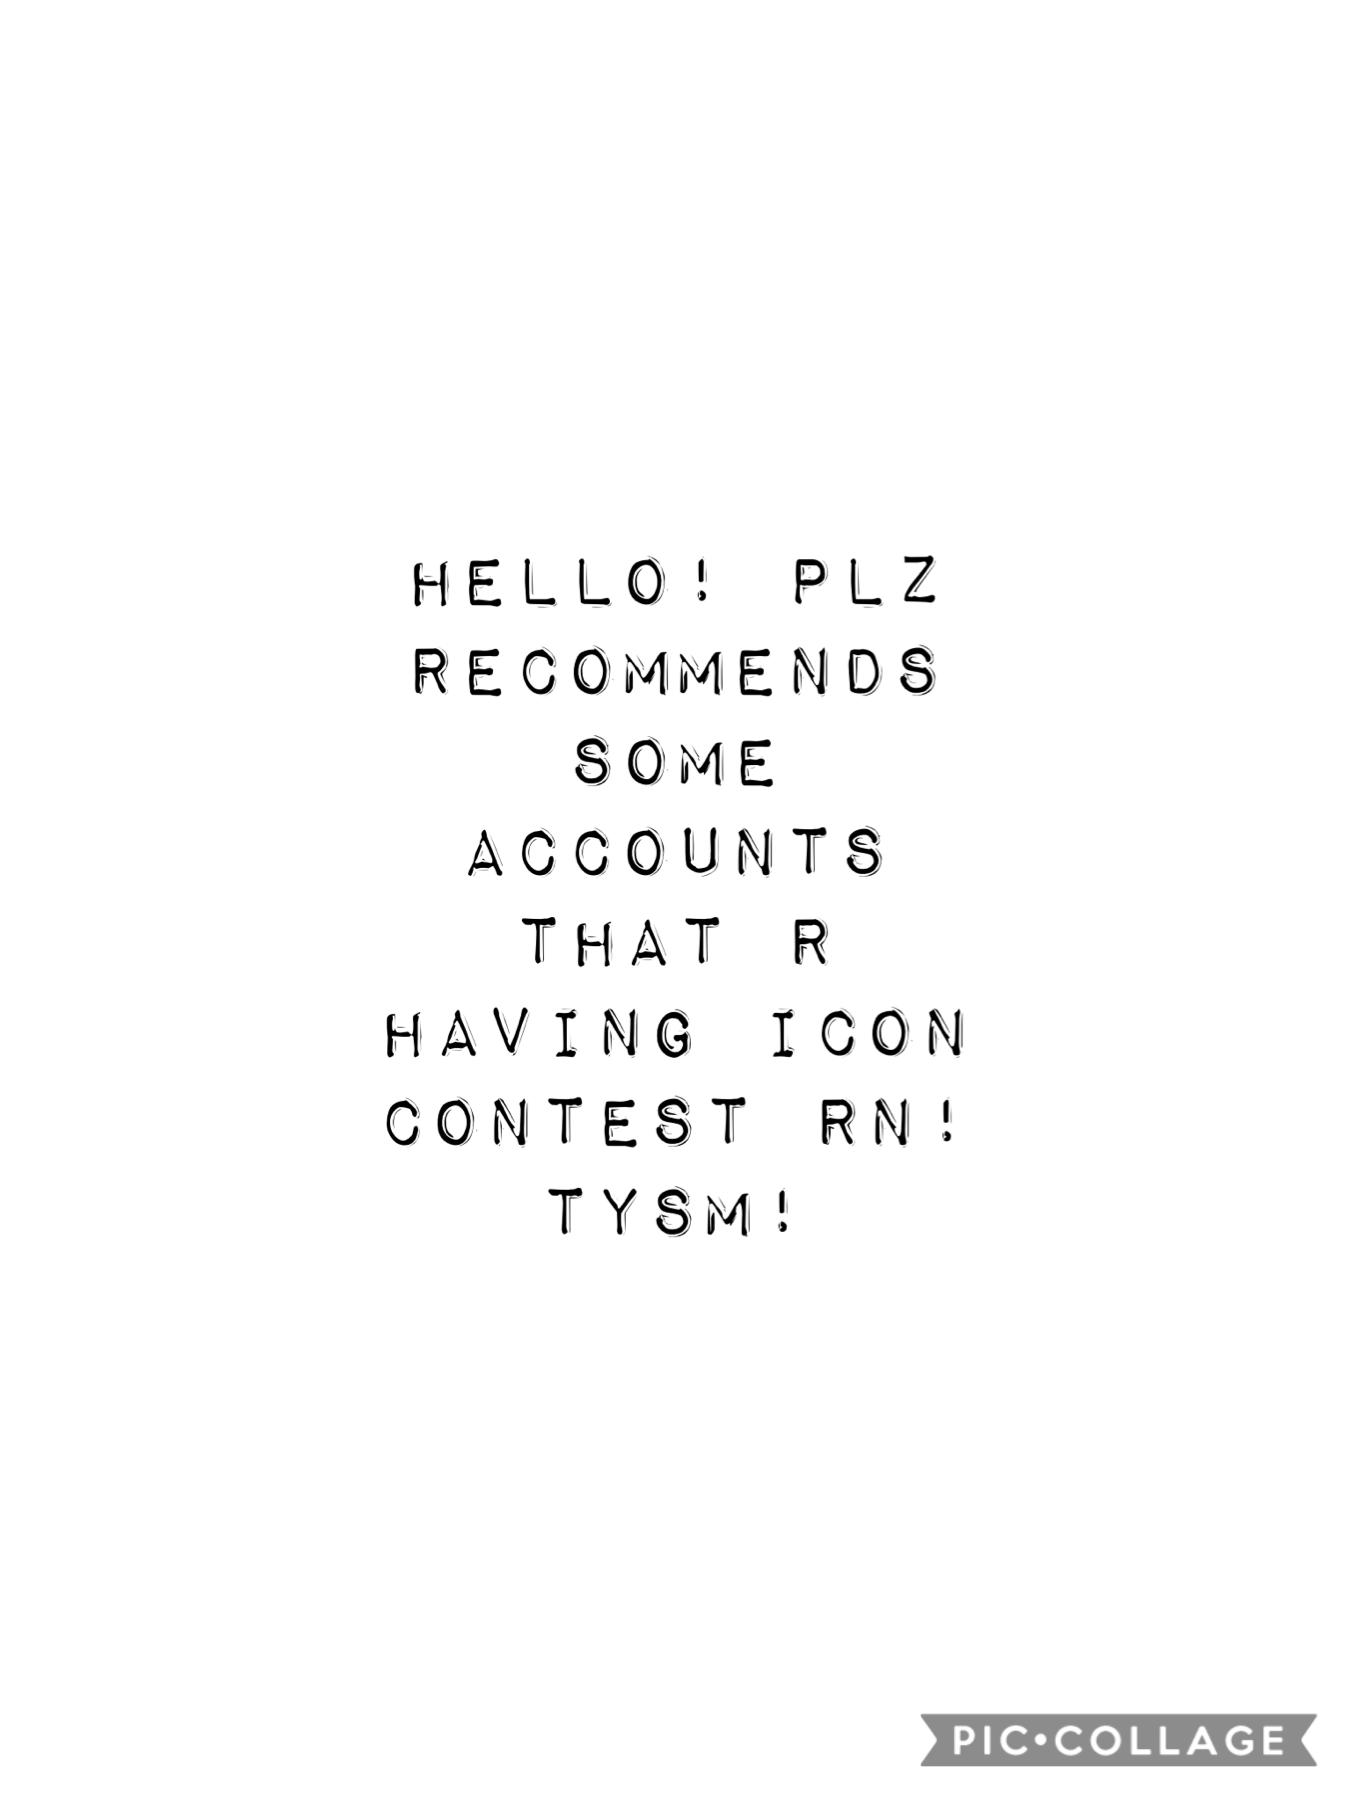 Recommended acc down below! Ty!